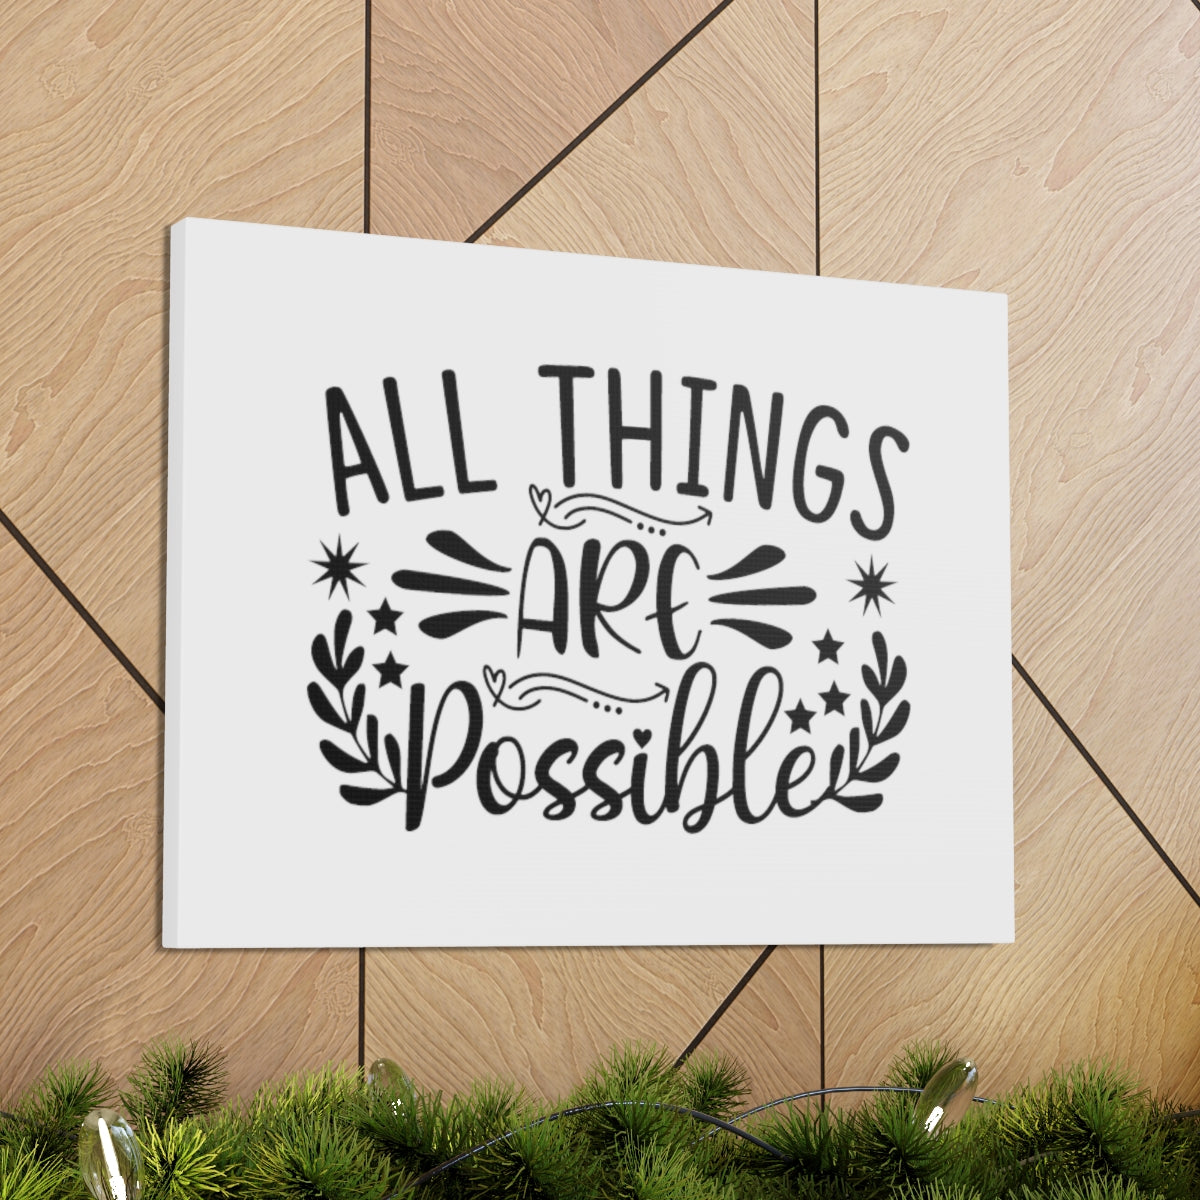 Scripture Walls All Things Are Possible Mark 9:23 Christian Wall Art Bible Verse Print Ready to Hang Unframed-Express Your Love Gifts